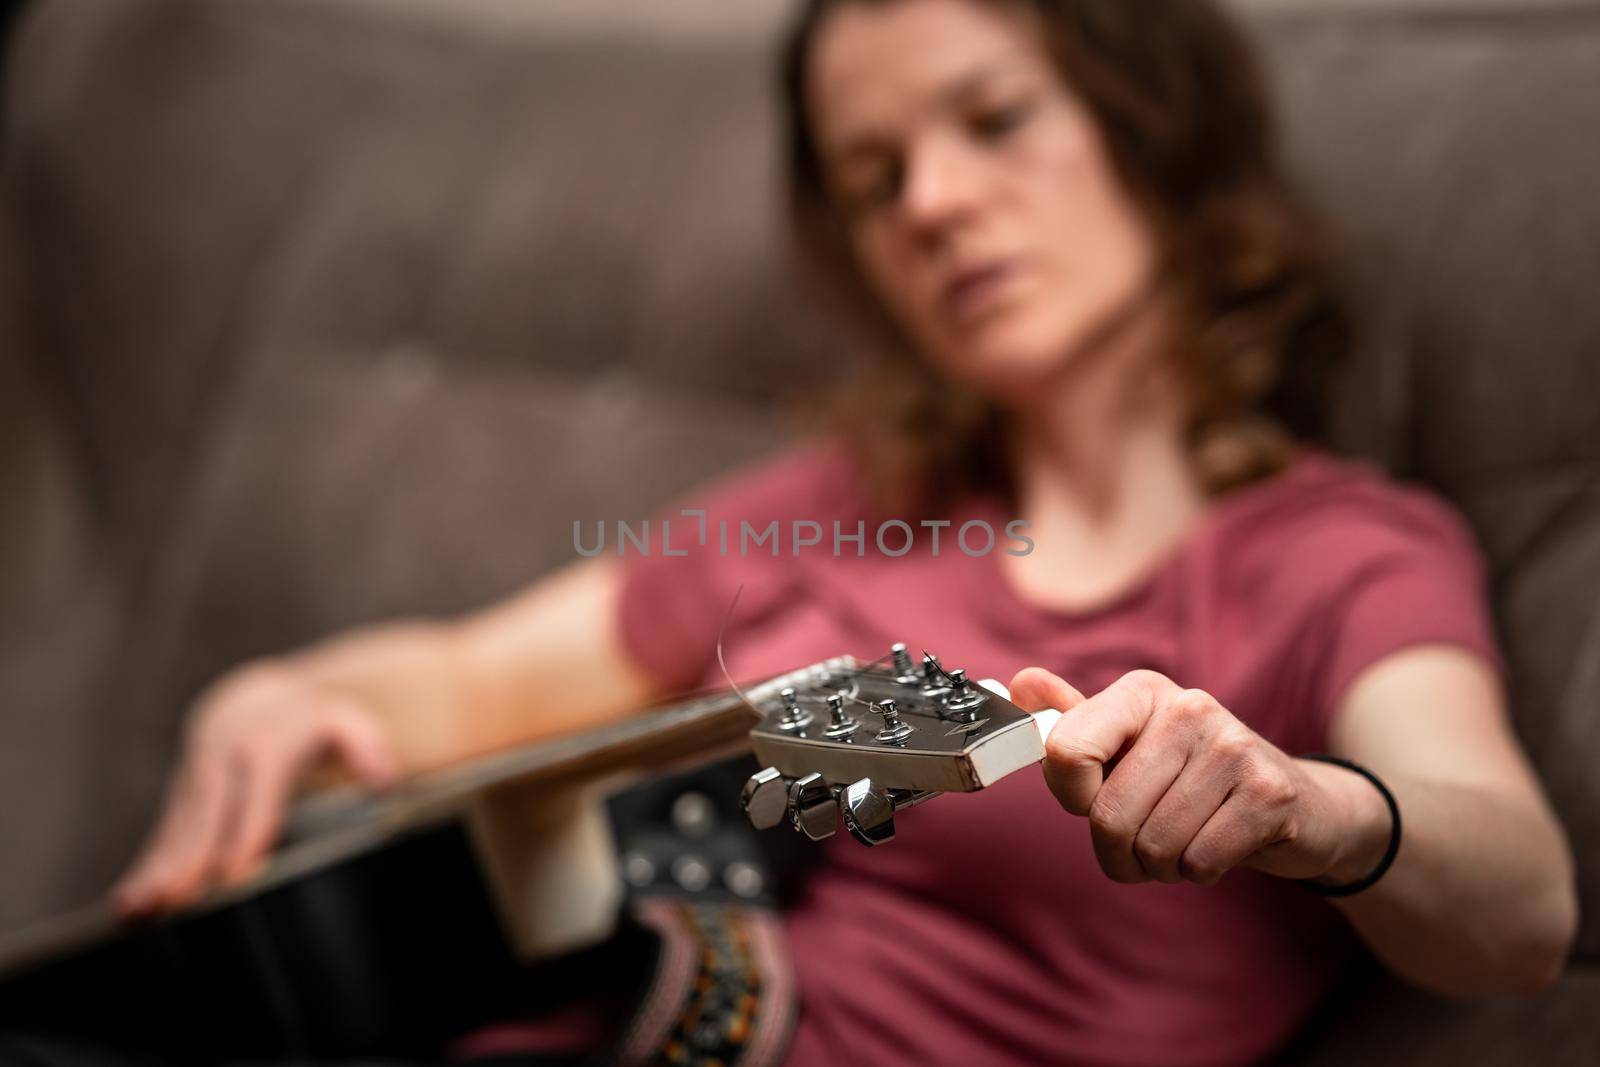 woman tuning guitar at home on the couch by Edophoto